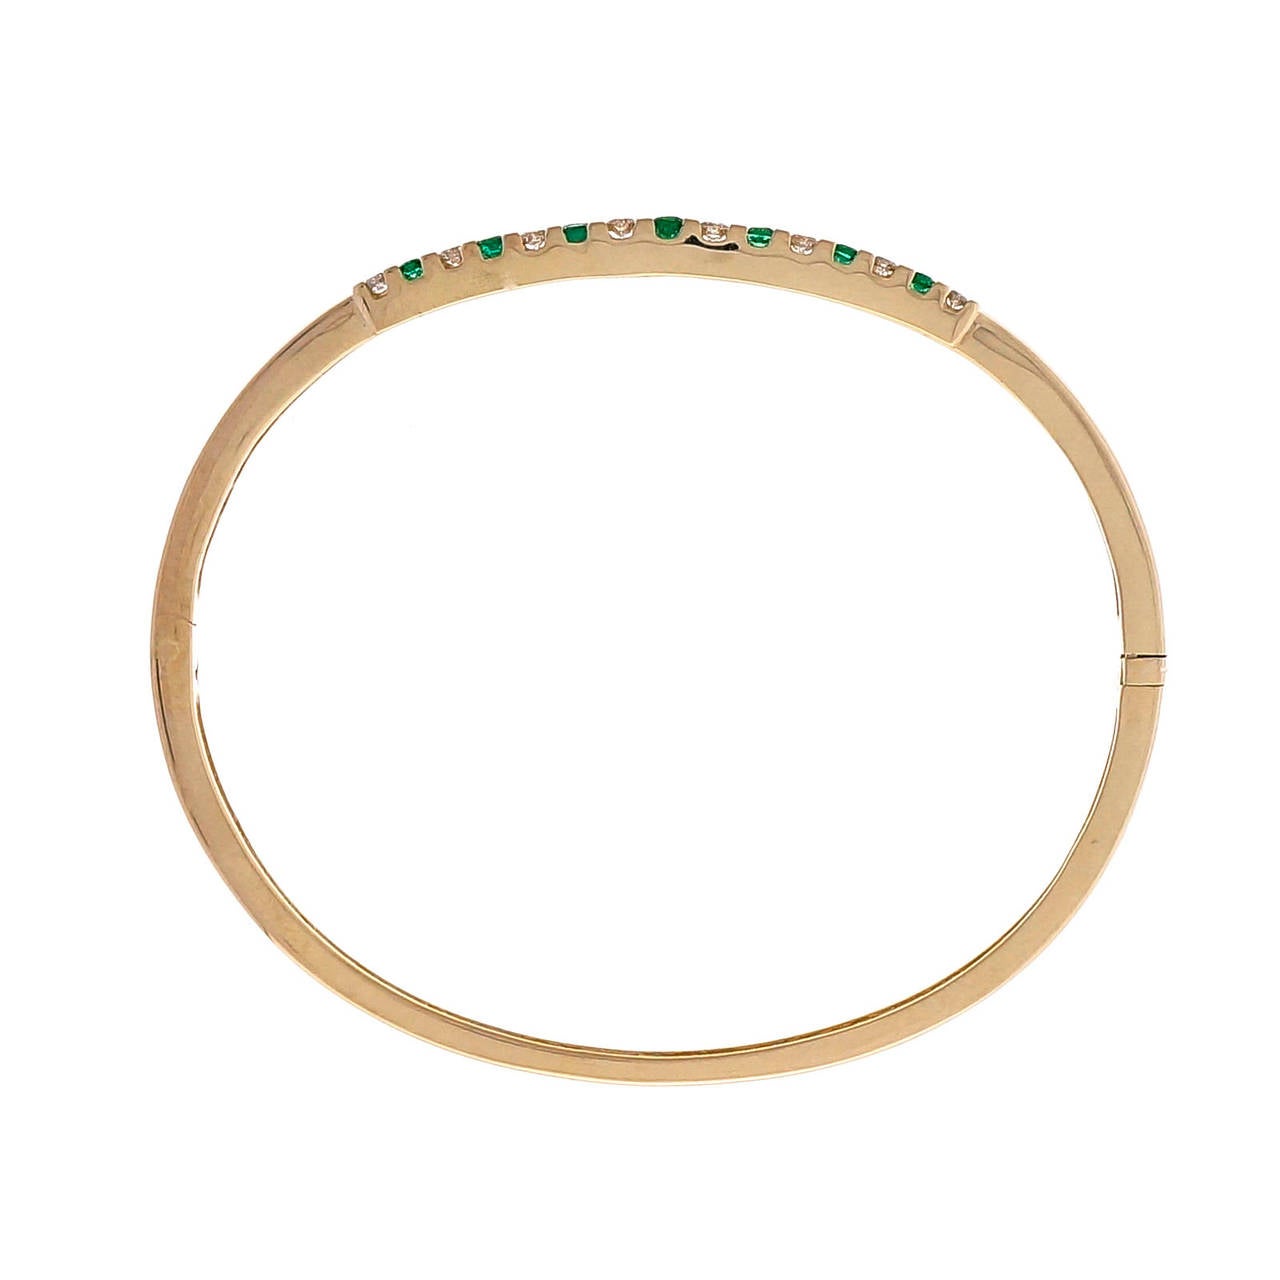 Oval hinged CEI 14k yellow gold bangle bracelet with alternating fine Emerald and diamond graduate top.

24 round diamonds, approx. total weight .50cts, G, SI1
21 round fine green Emeralds, approx. total weight .48cts, SI
14k yellow gold
16.7